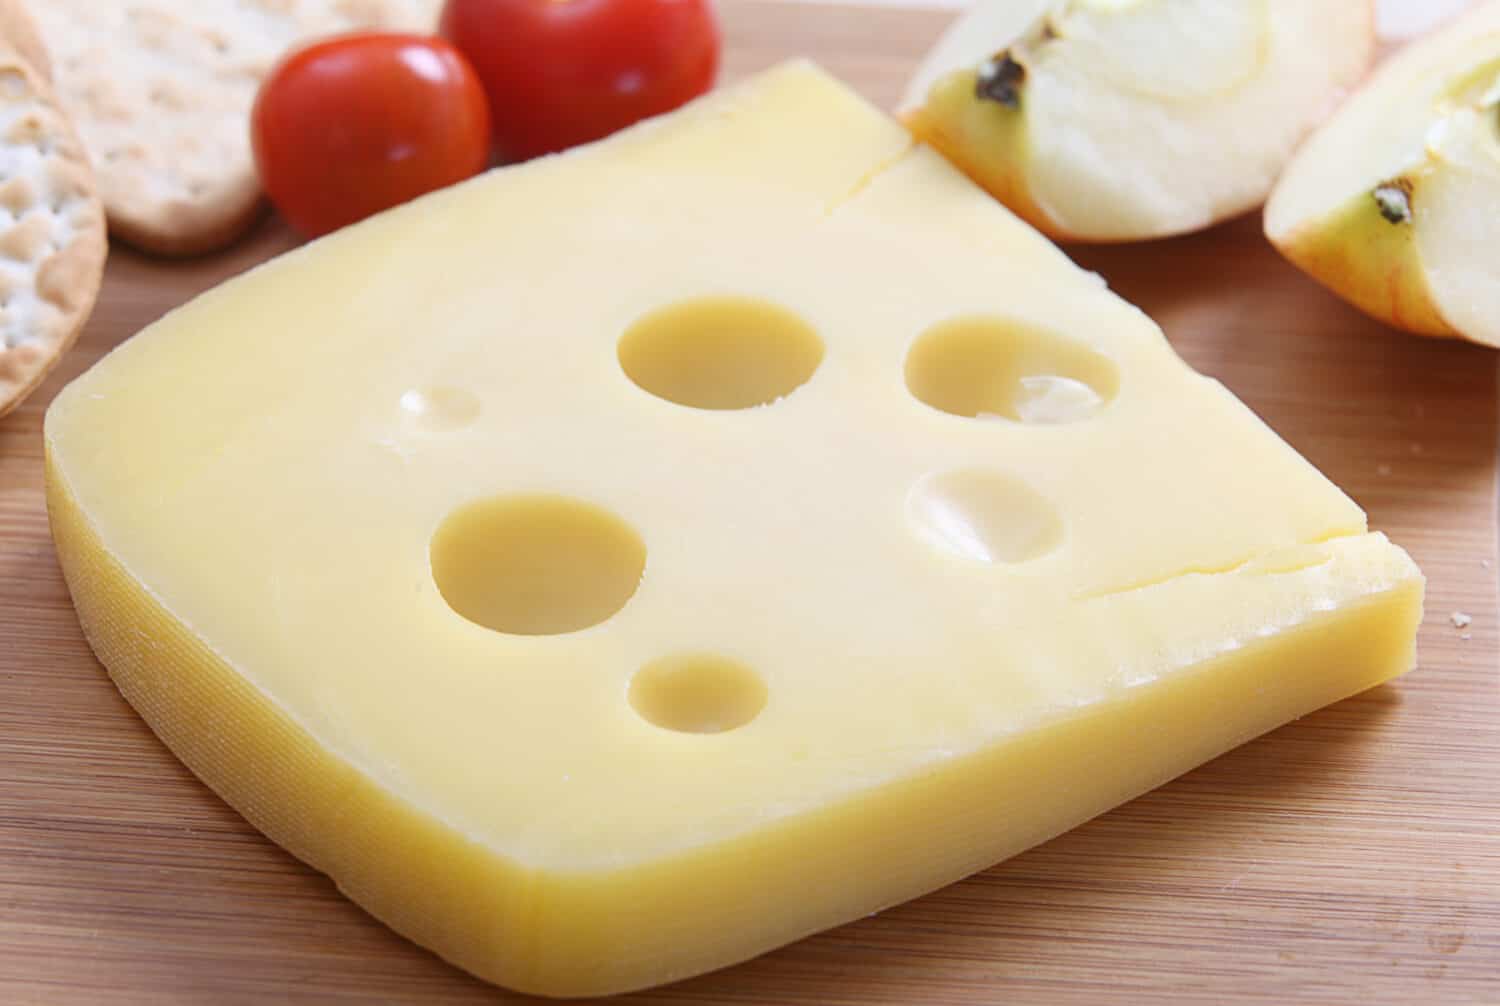 A wedge of Jarlsberg Danish cheese with crackers and cherry tomatoes on a cheeseboard